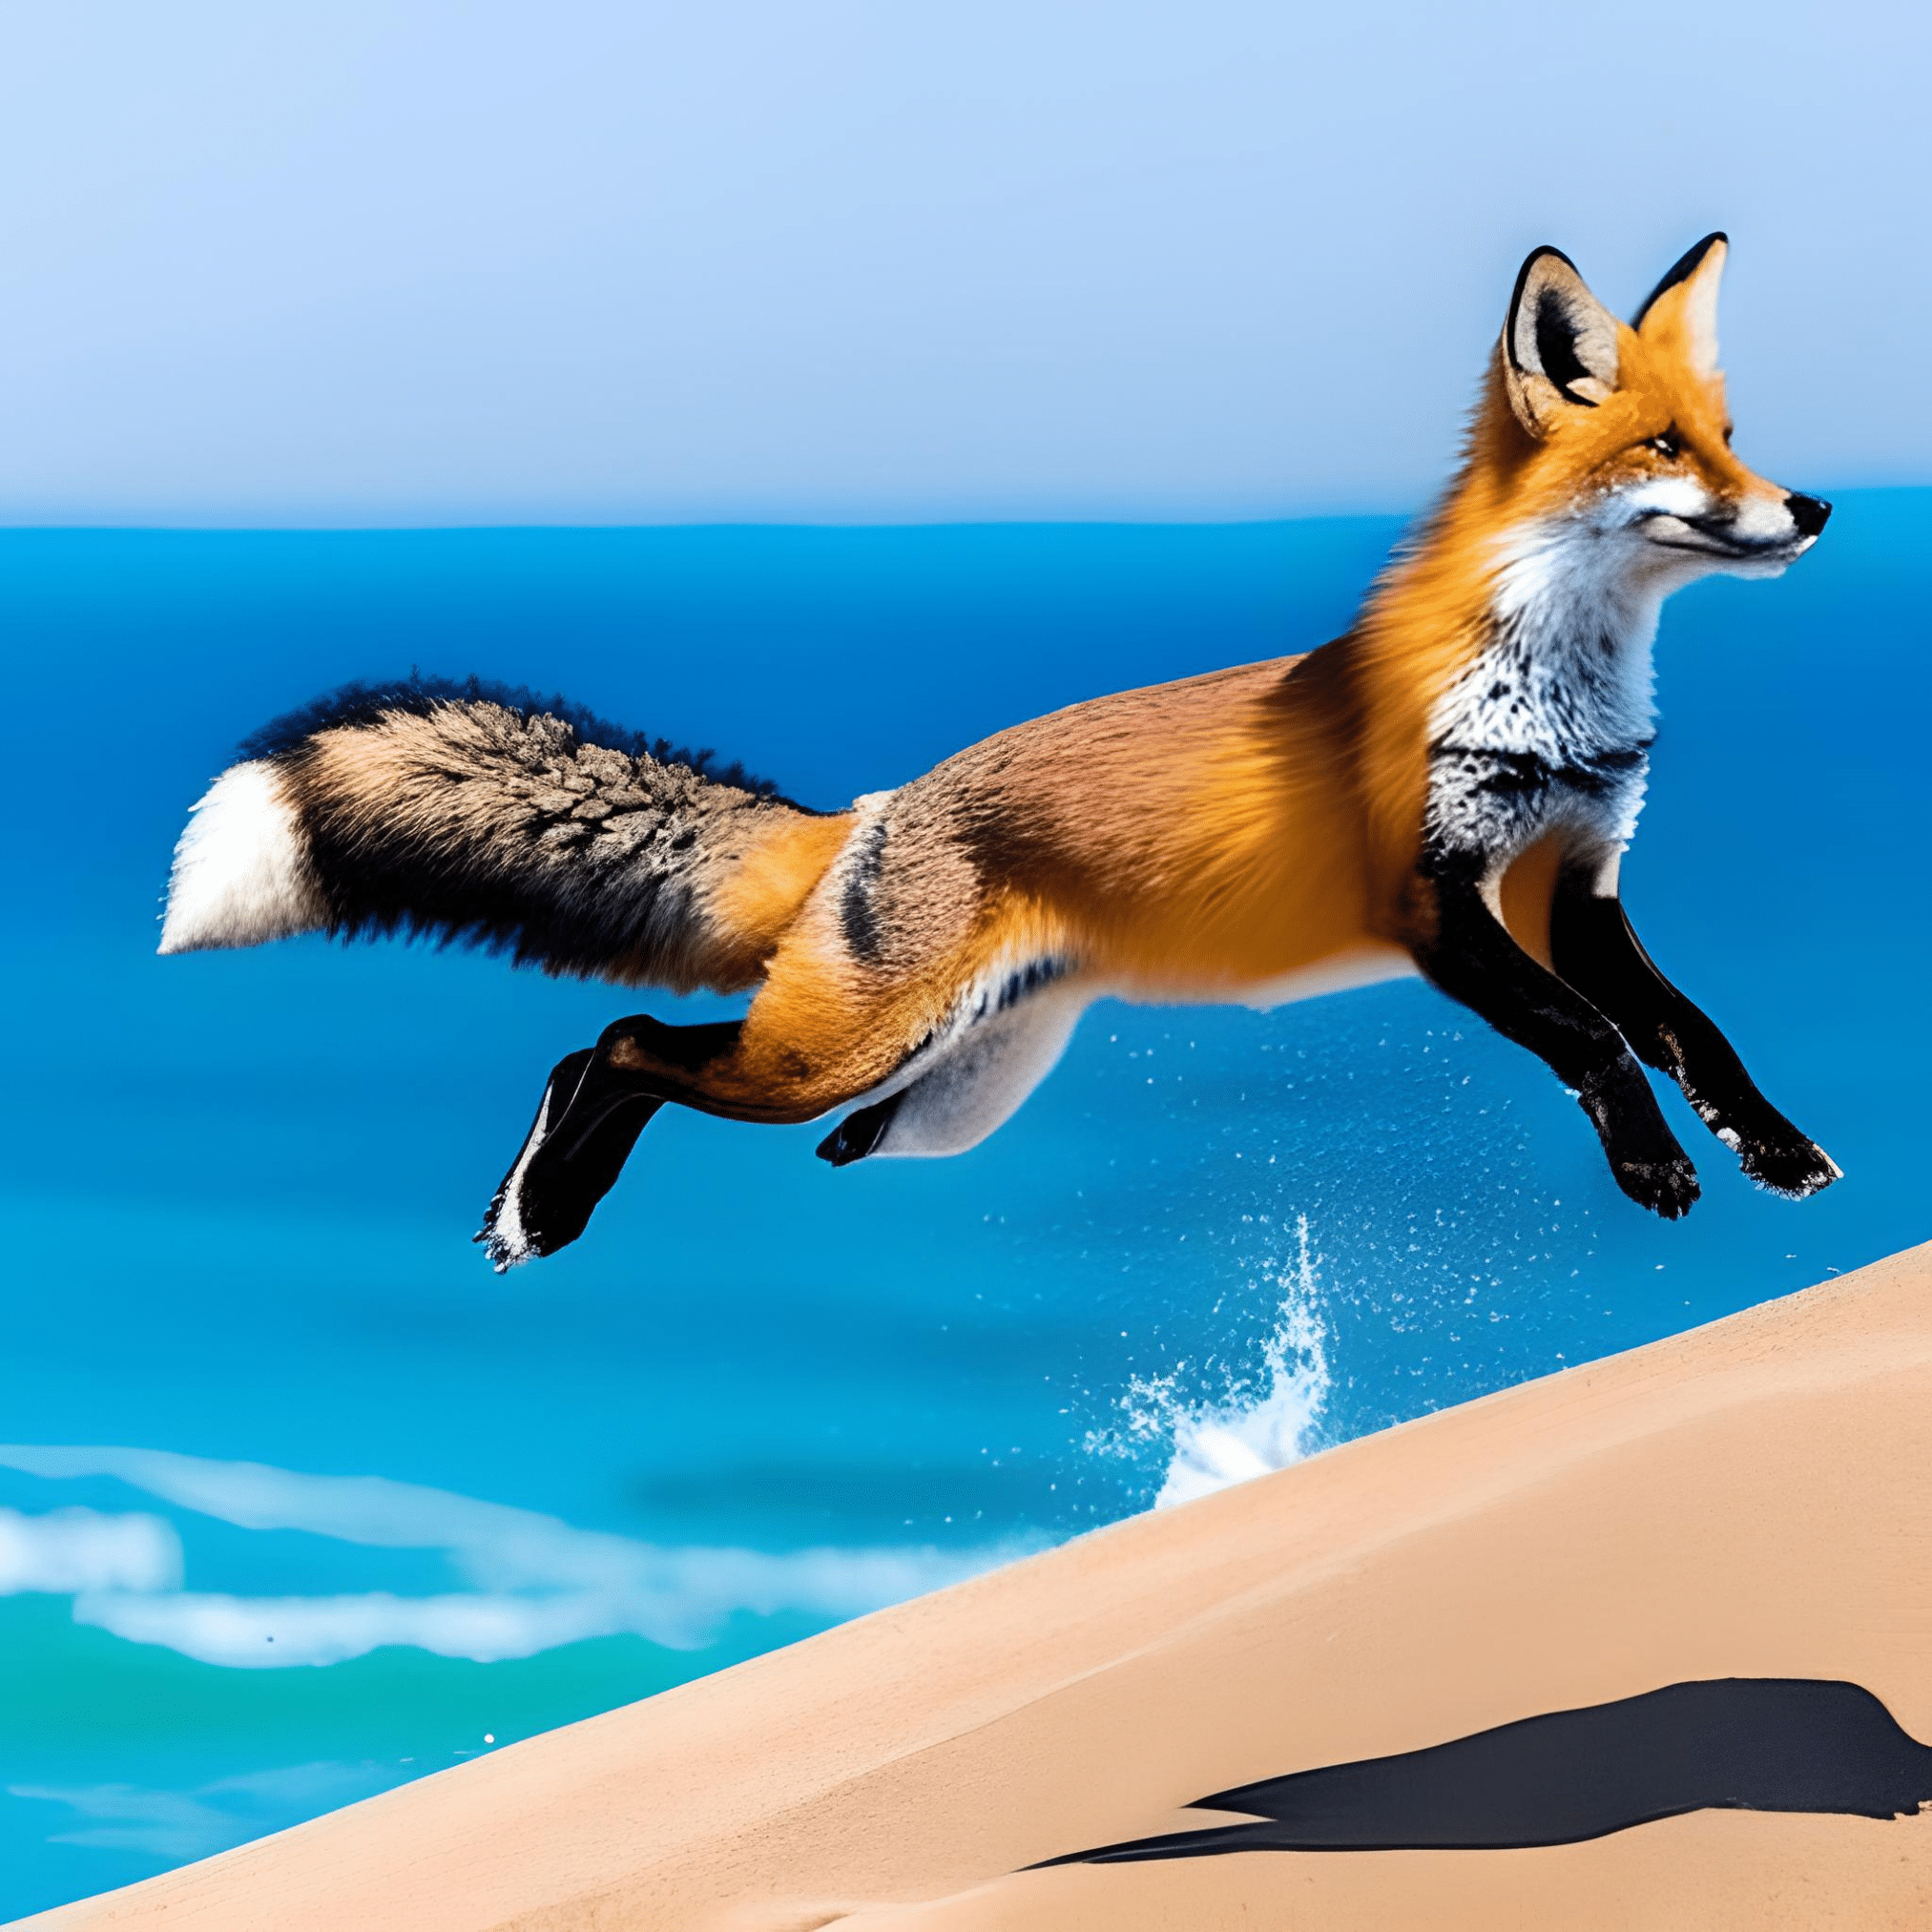 A fox on summer vacation jumps into a flying laptop and the ocean is far away. 